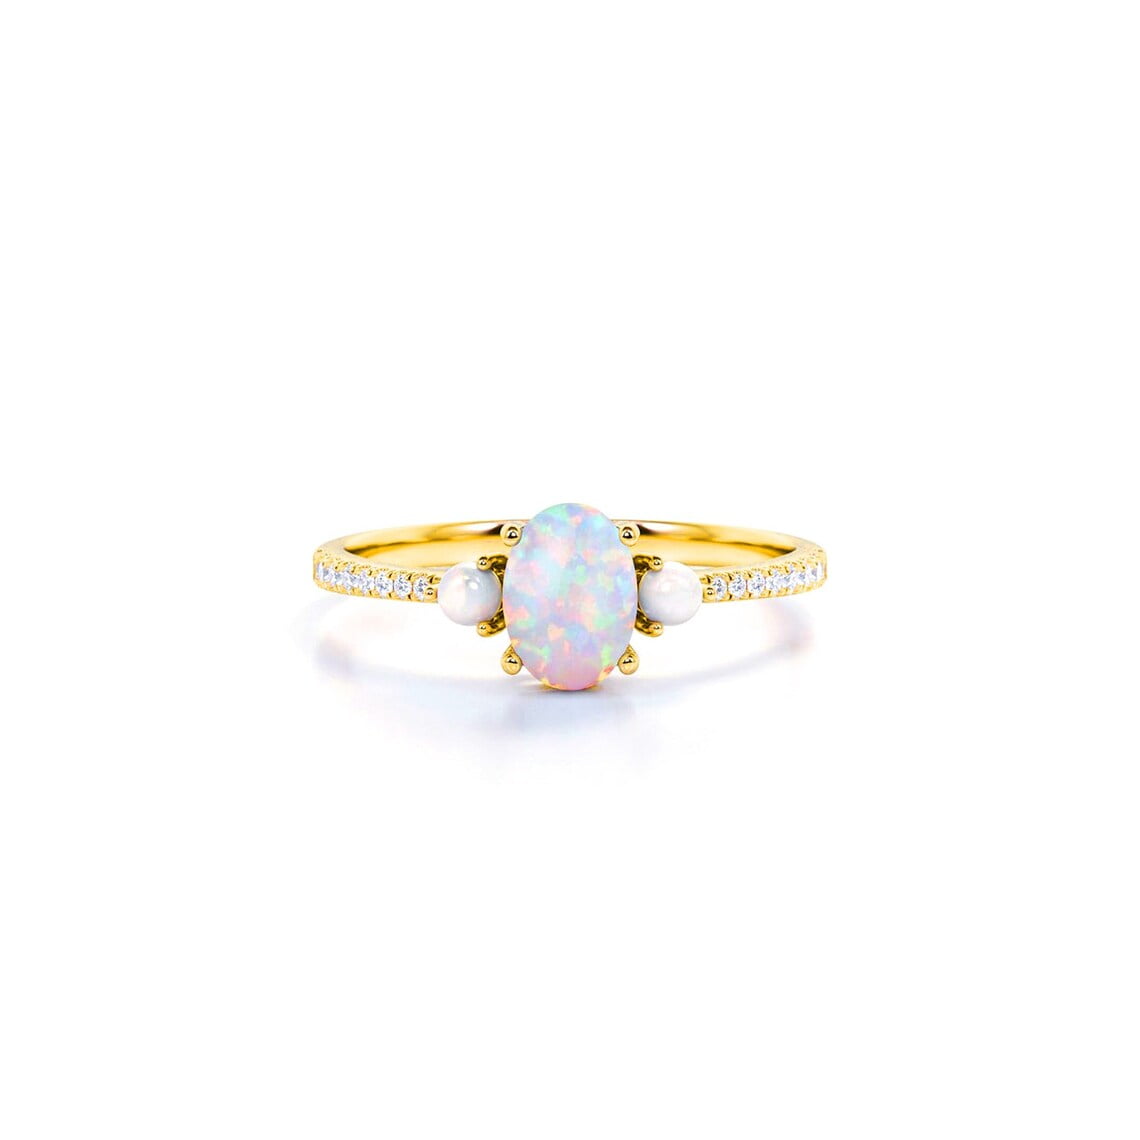 This item is unavailable - Etsy | Antique opal ring, Antique rings, Opal  rings